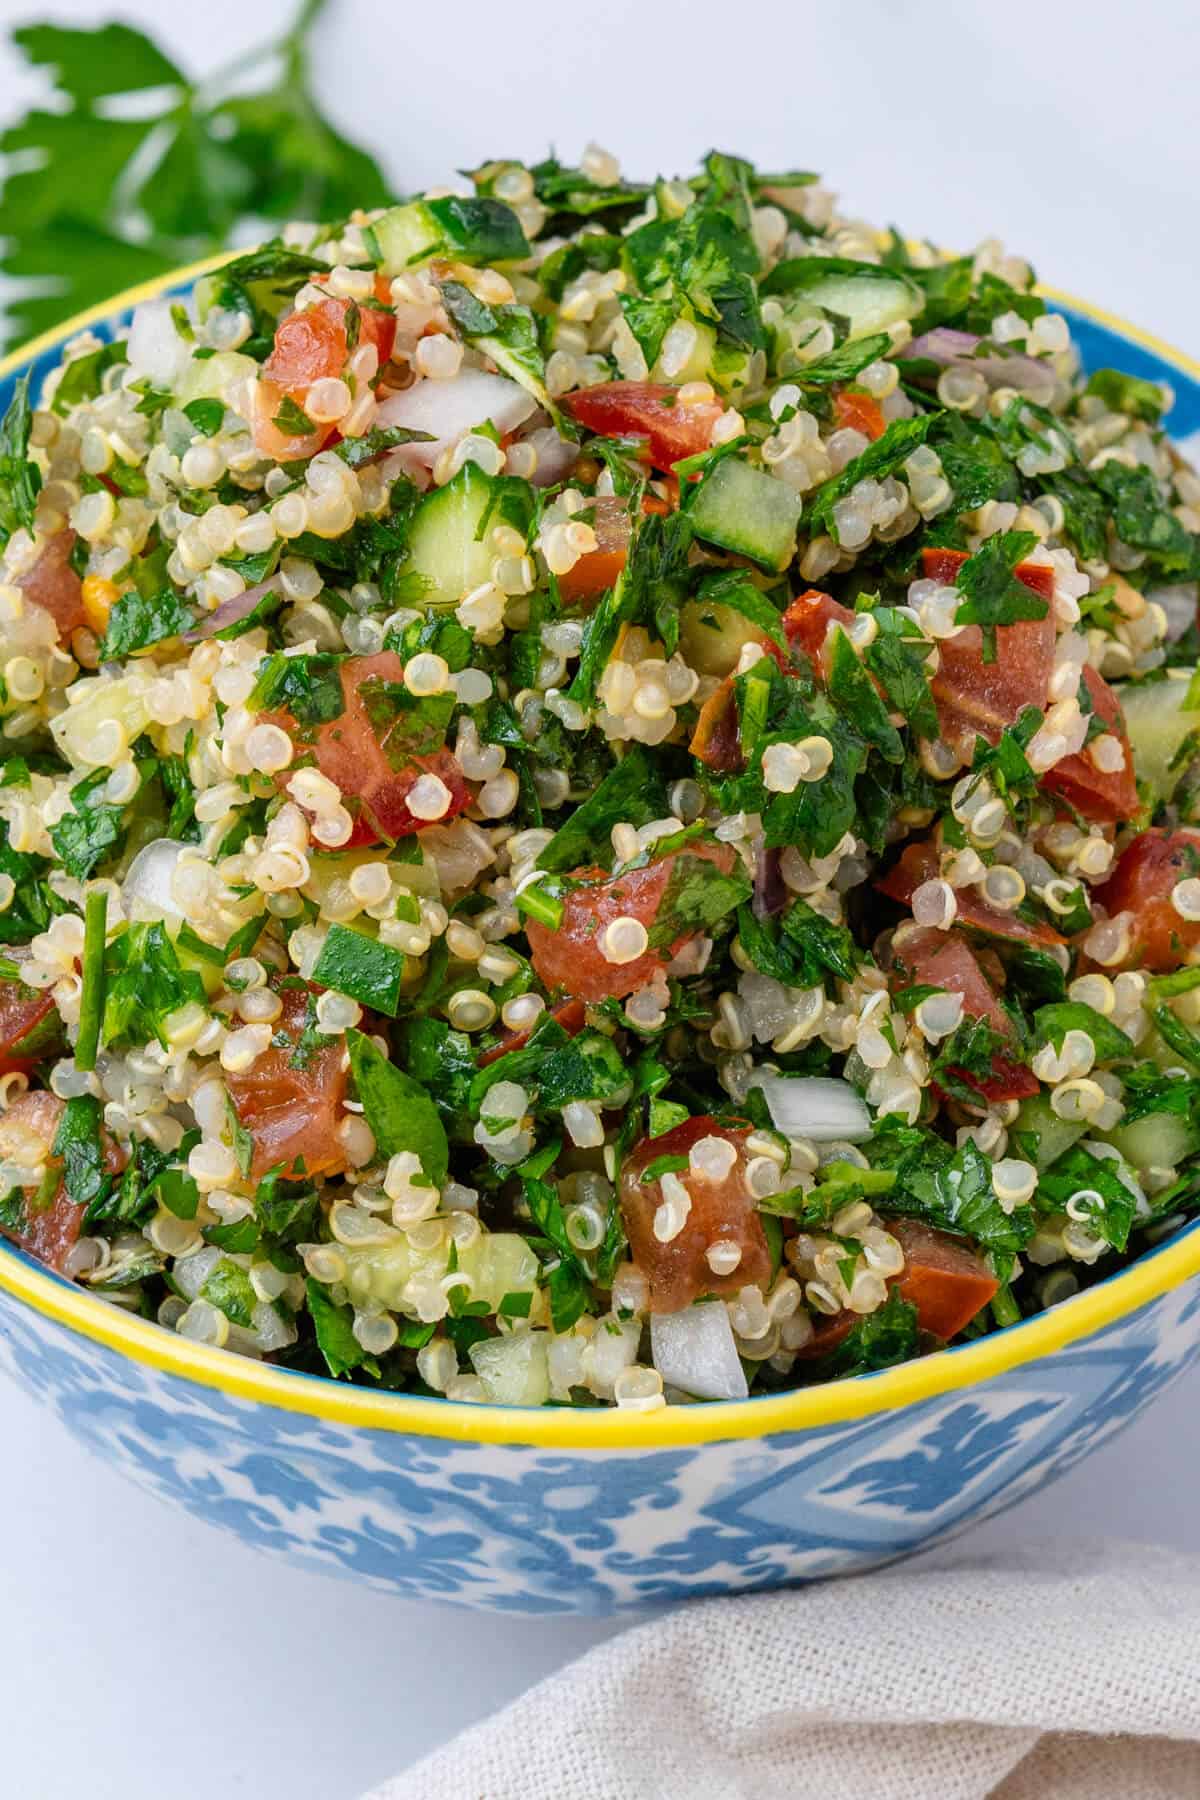 Quinoa with tabbouleh in a salad bowl